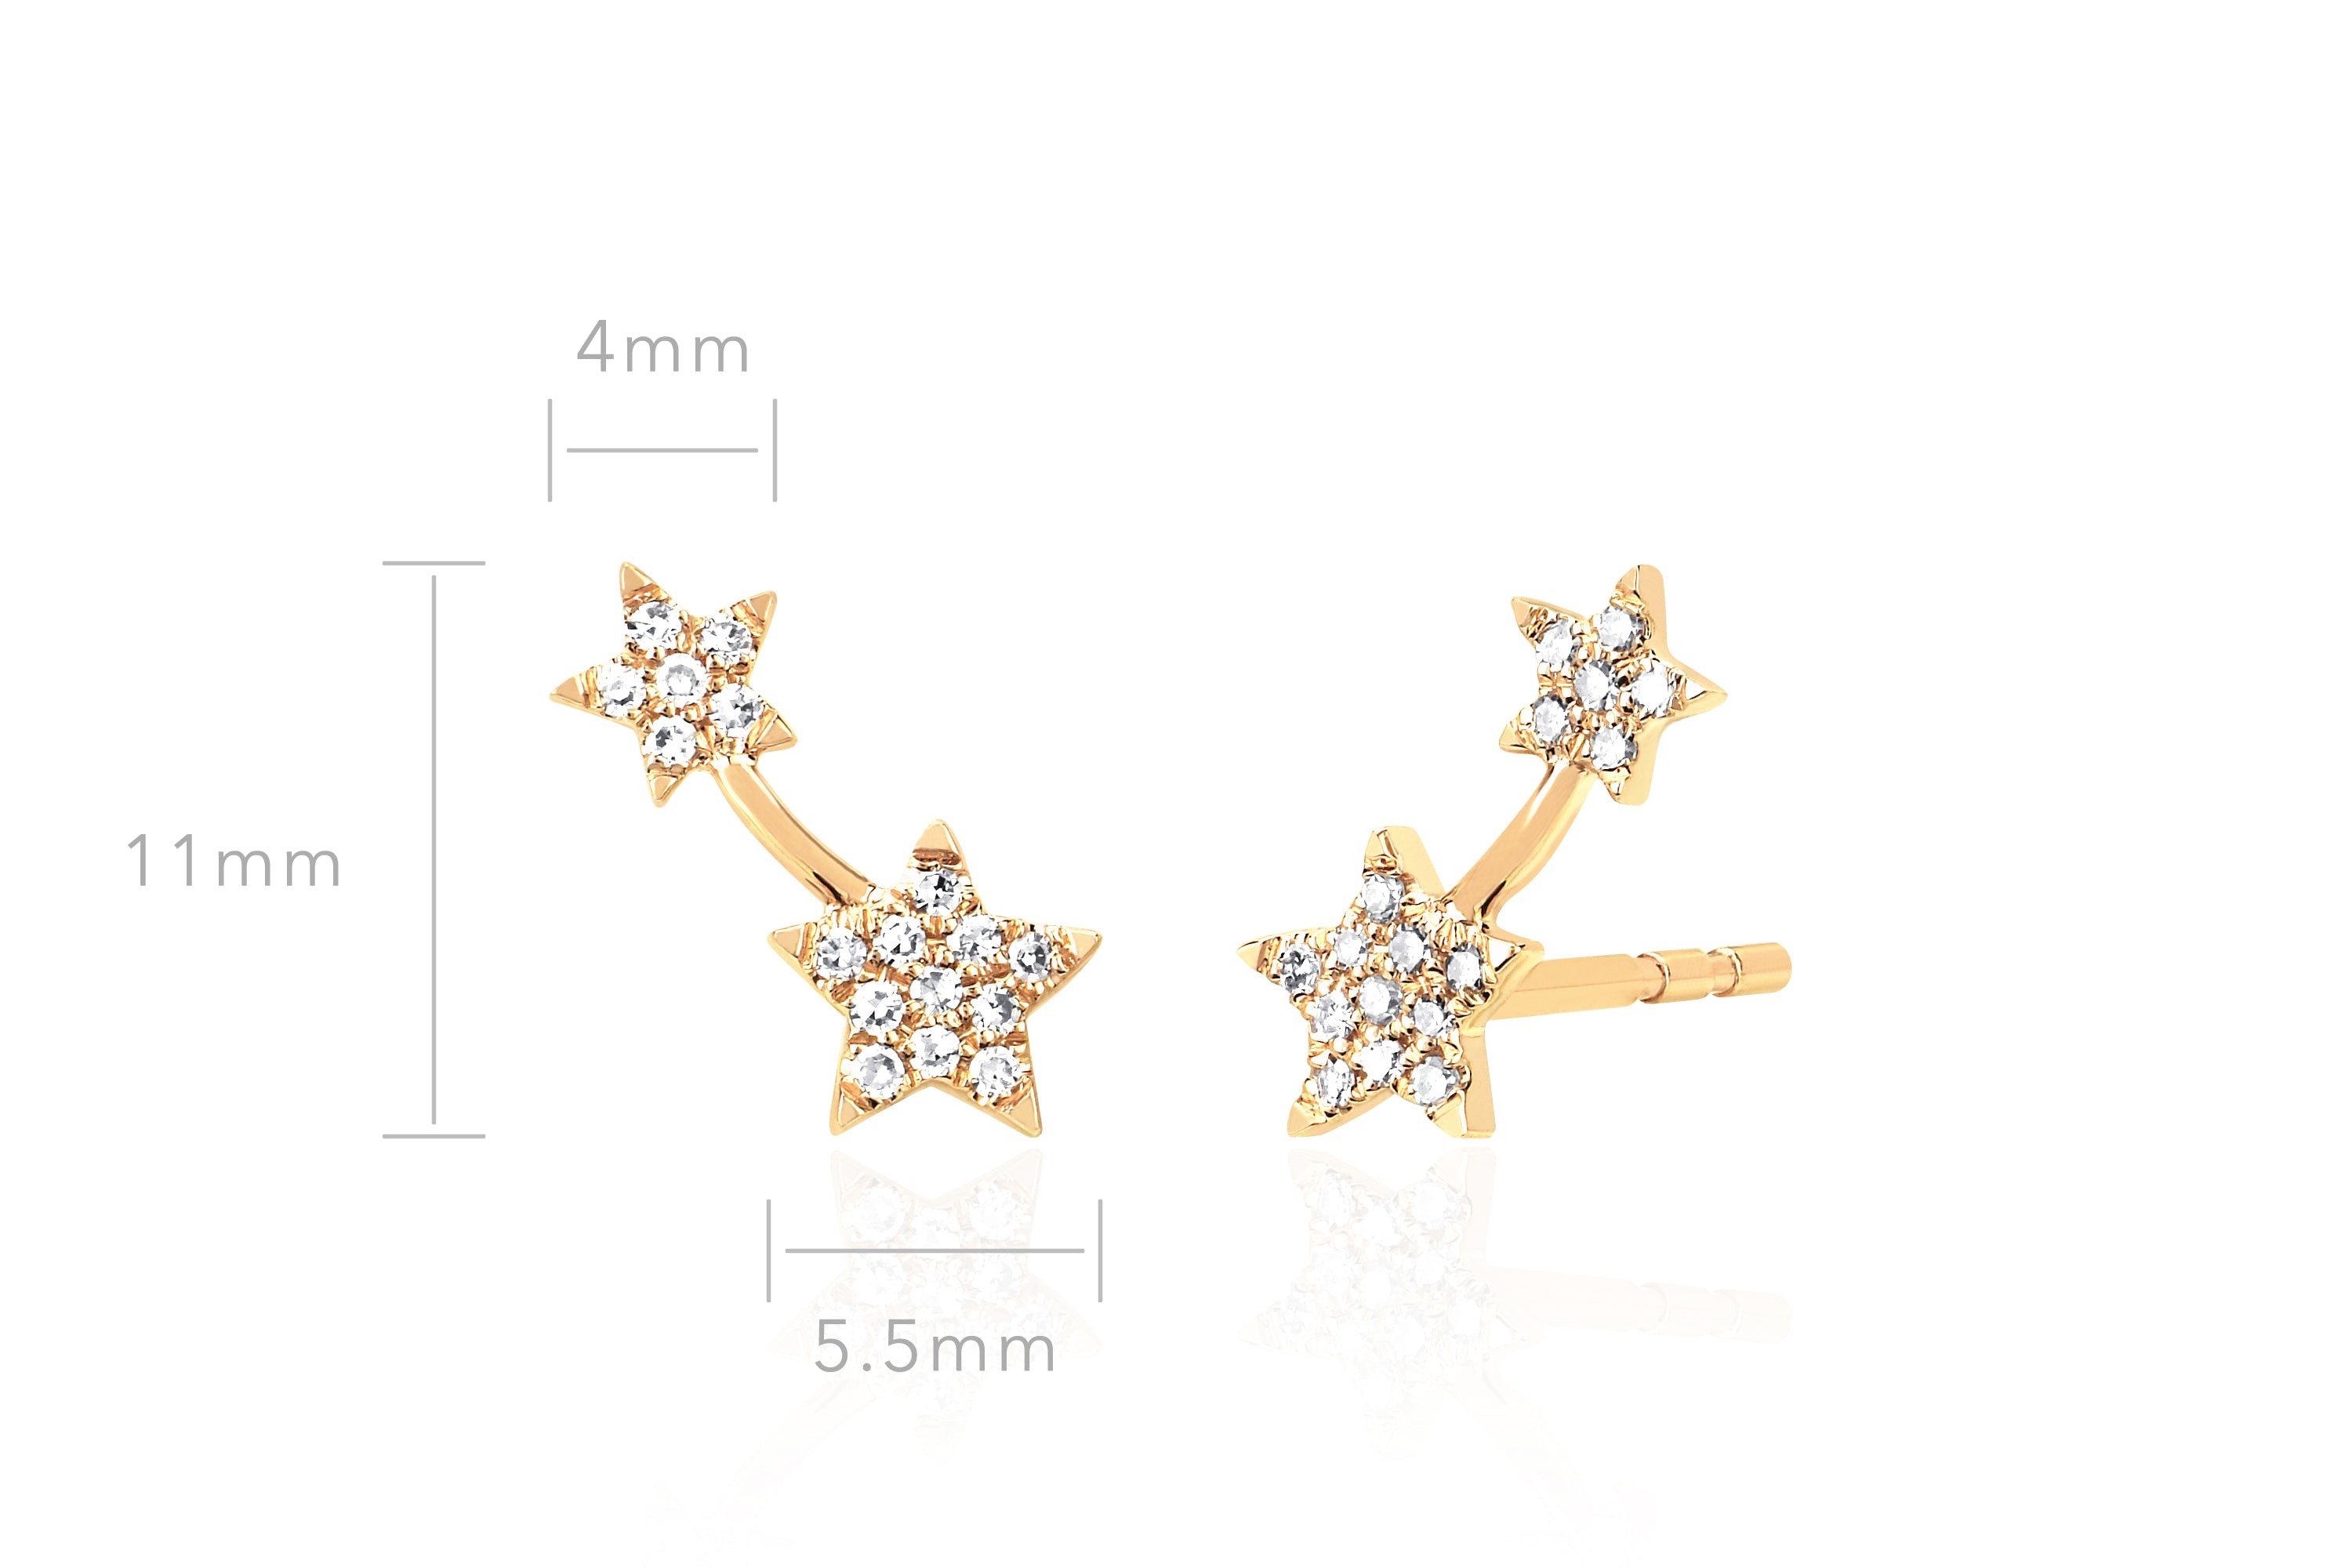 Diamond Double Star Stud Earring in 14k yellow gold with size measurements of 11mm height, 4mm width of small star, and 5.5mm of large star